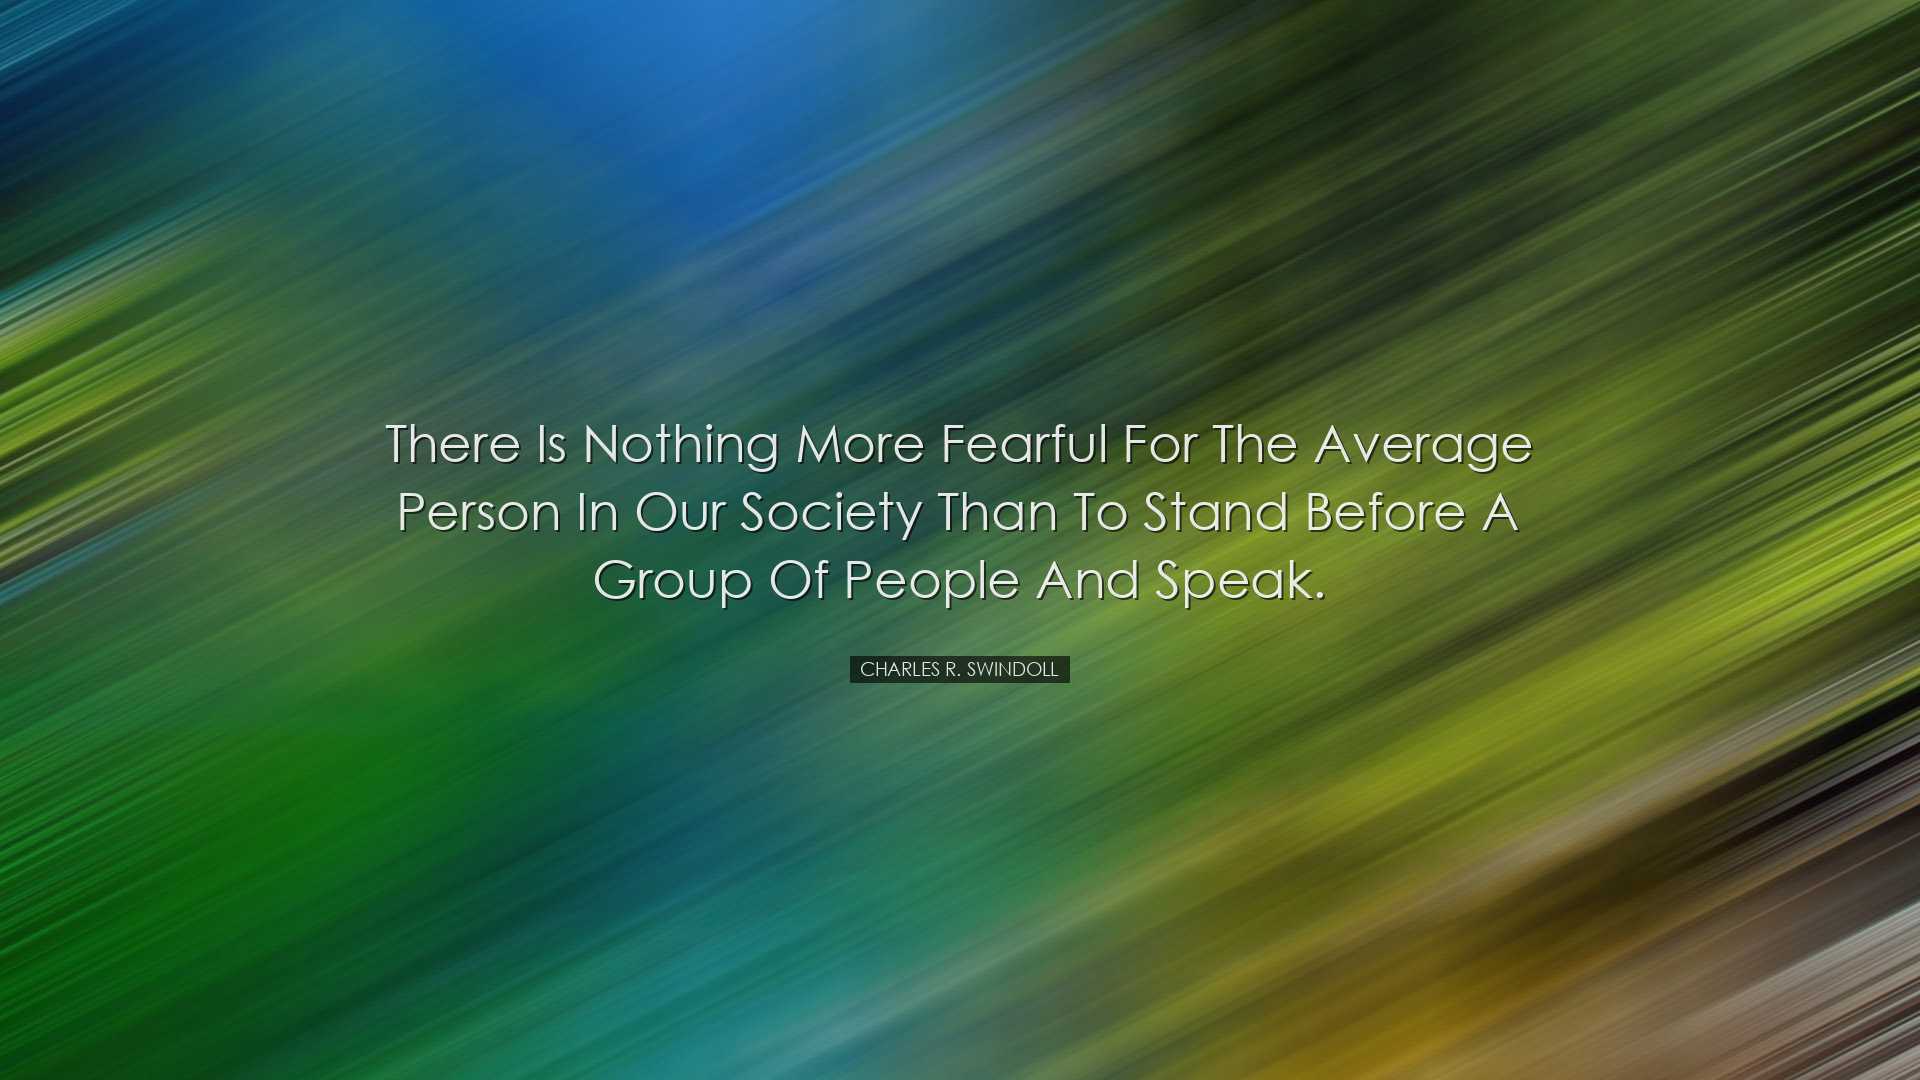 There is nothing more fearful for the average person in our societ